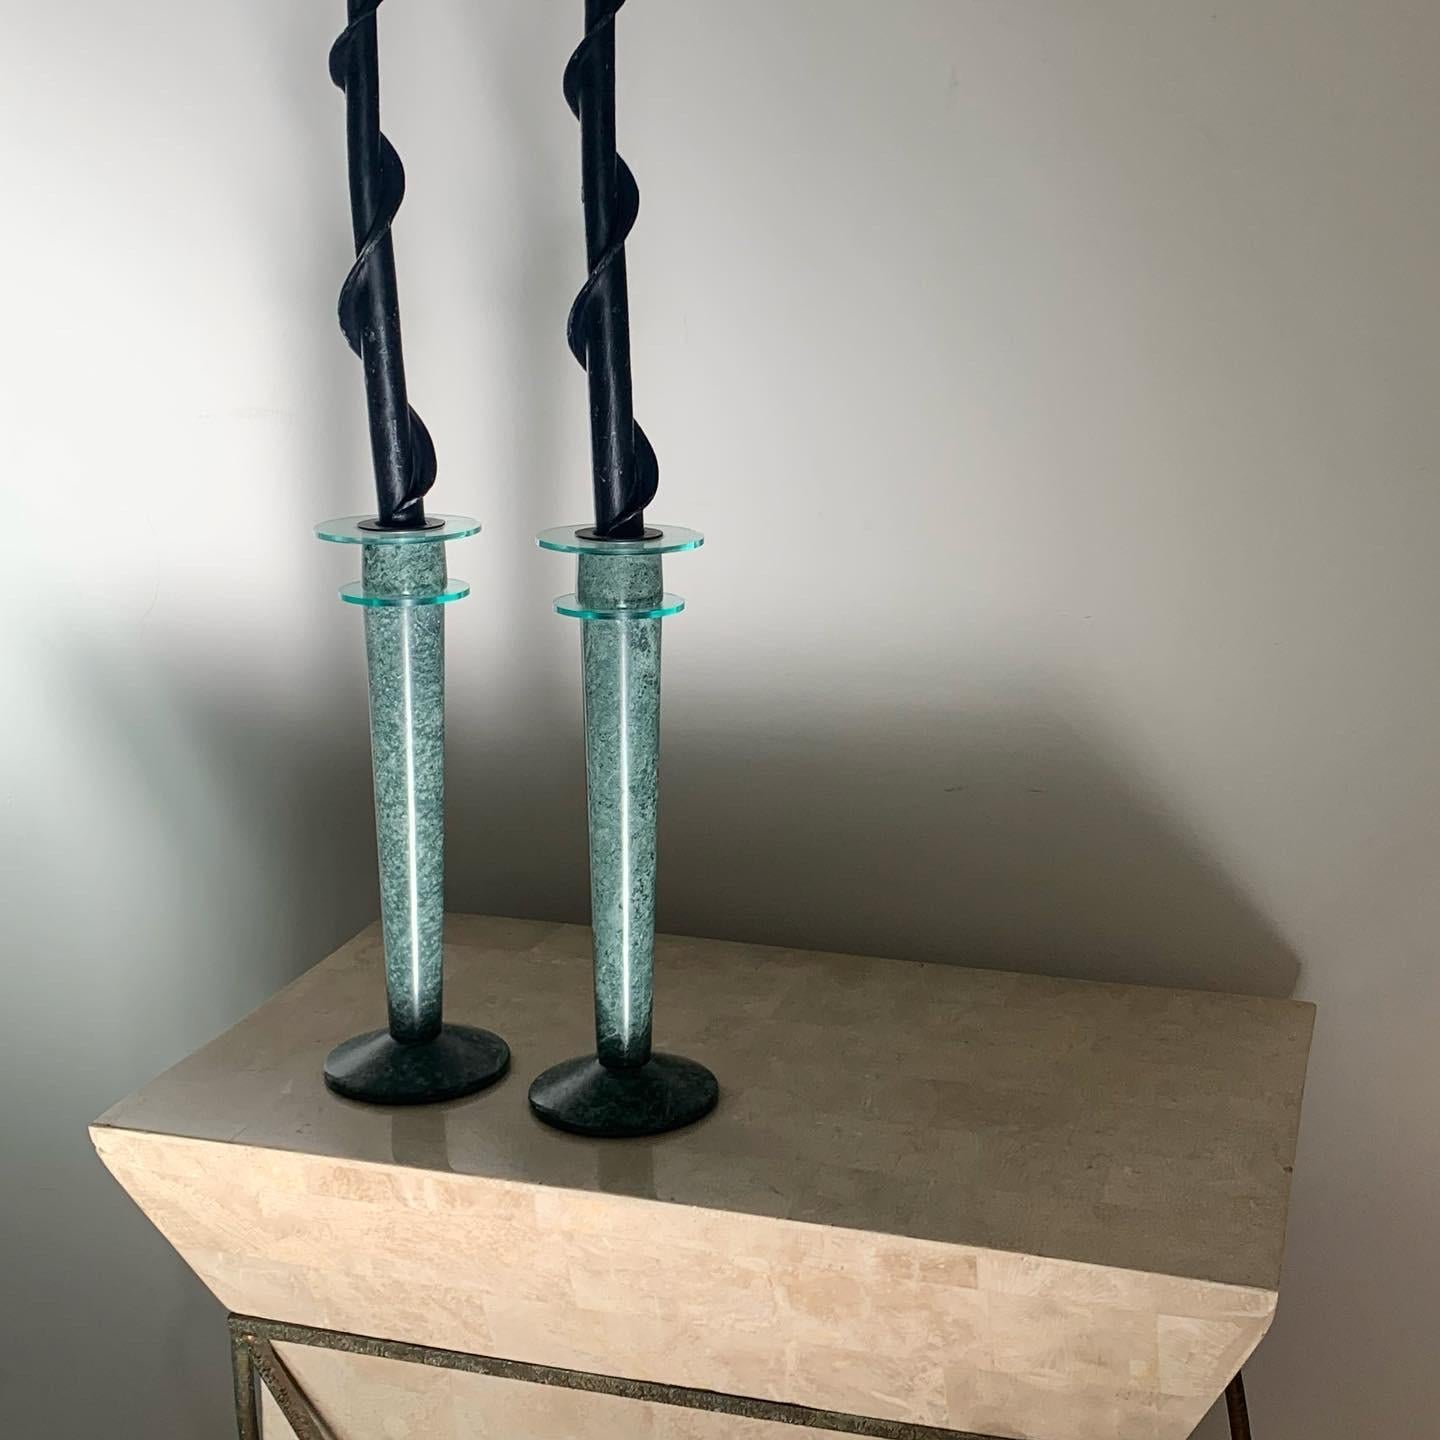 Late 20th Century Postmodern Green Marble and Lucite Candlesticks, circa 1980s For Sale